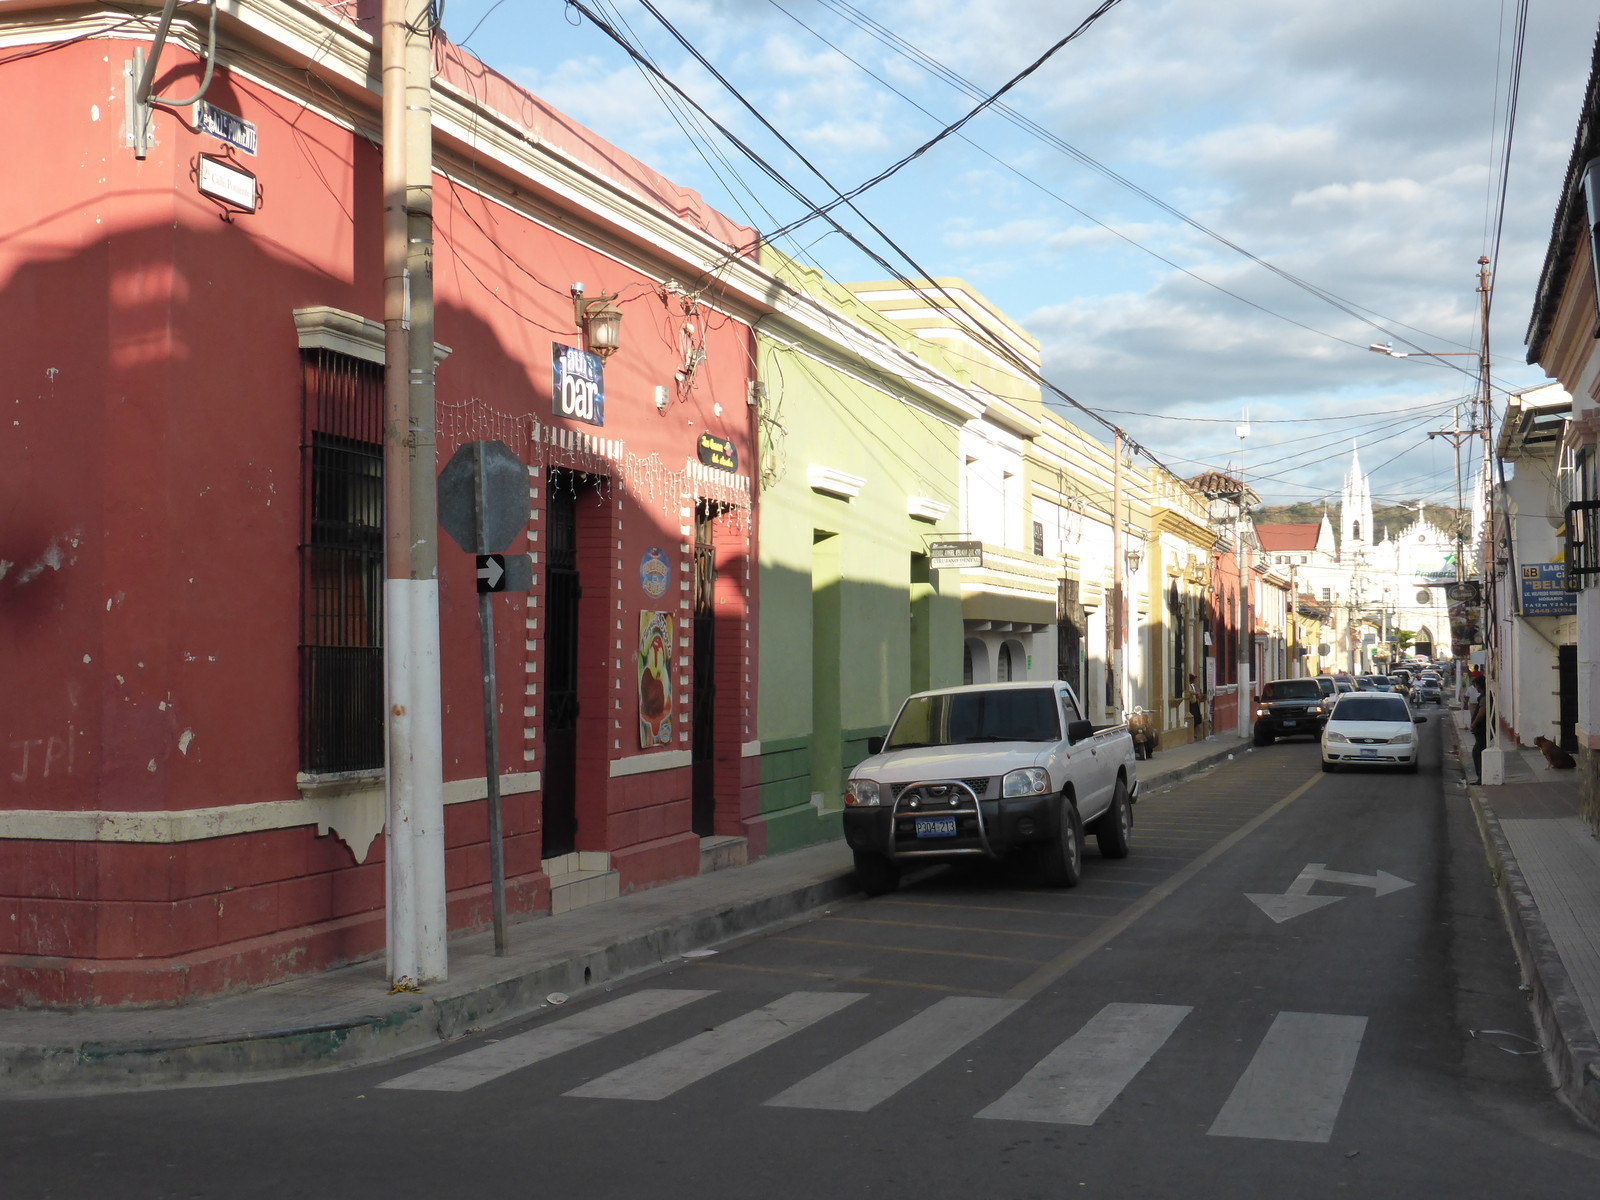 Pretty coloured buildings in the backstreets of Santa Ana